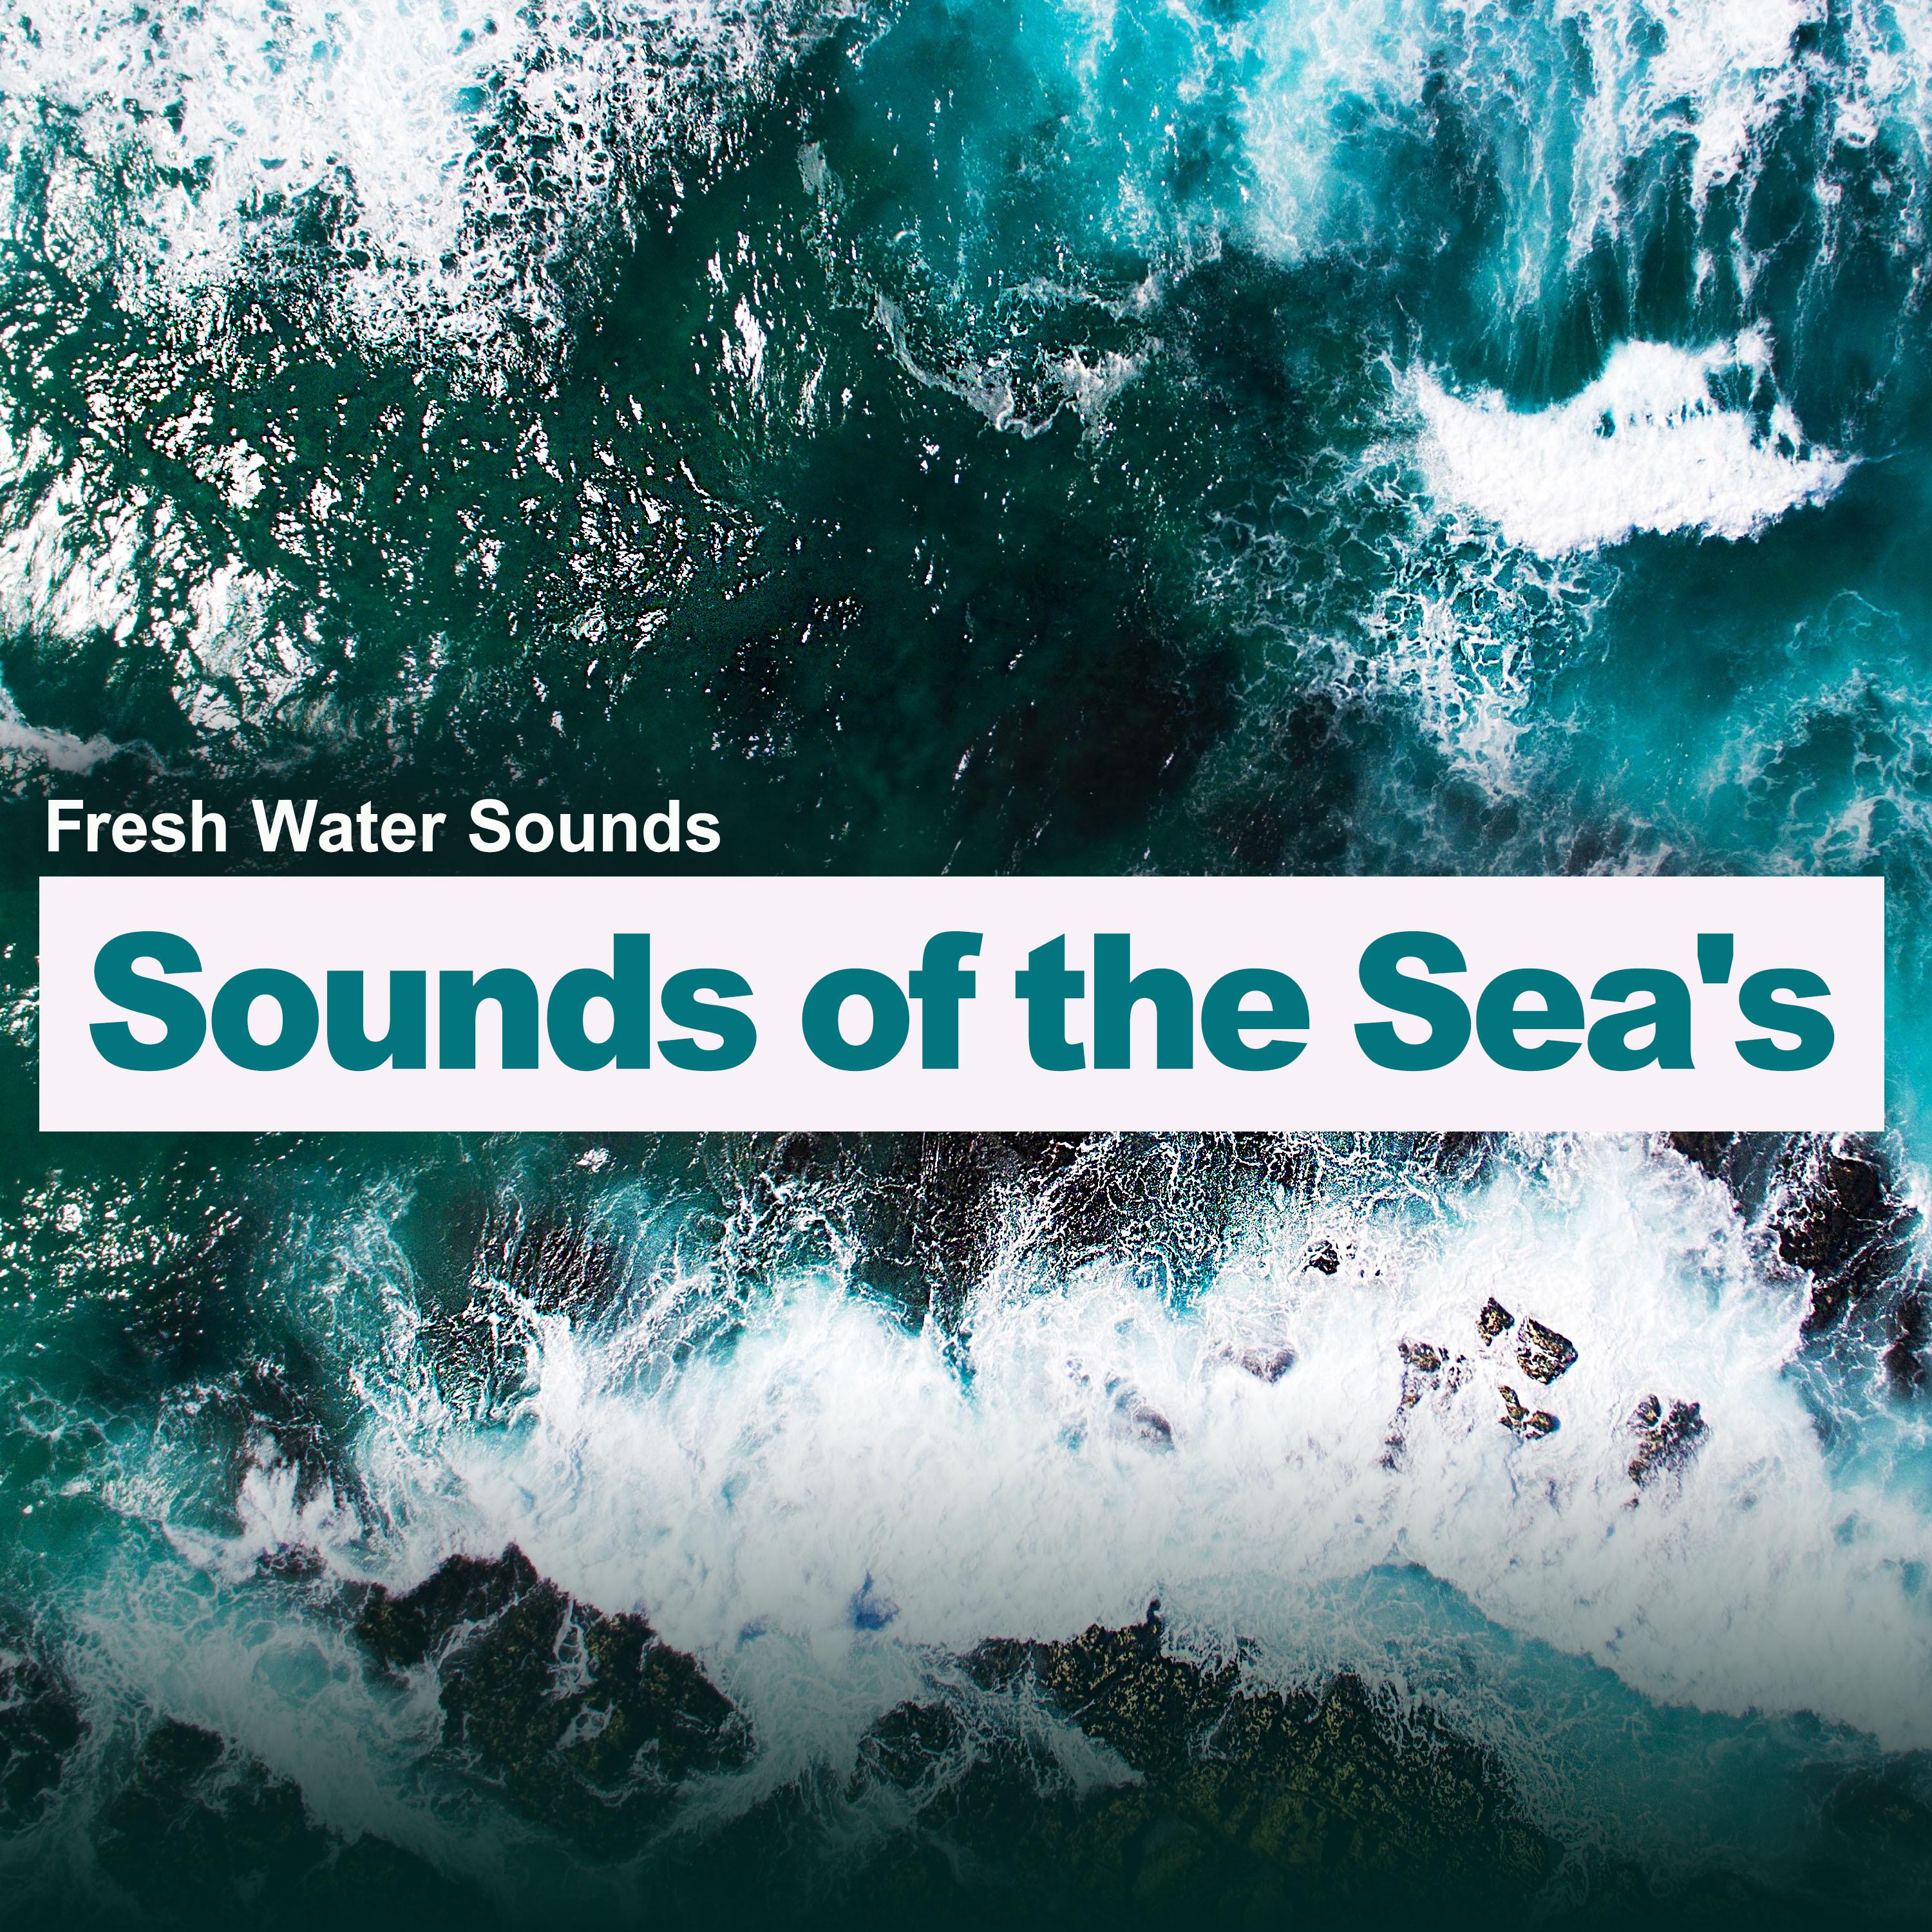 Sounds of the Sea's